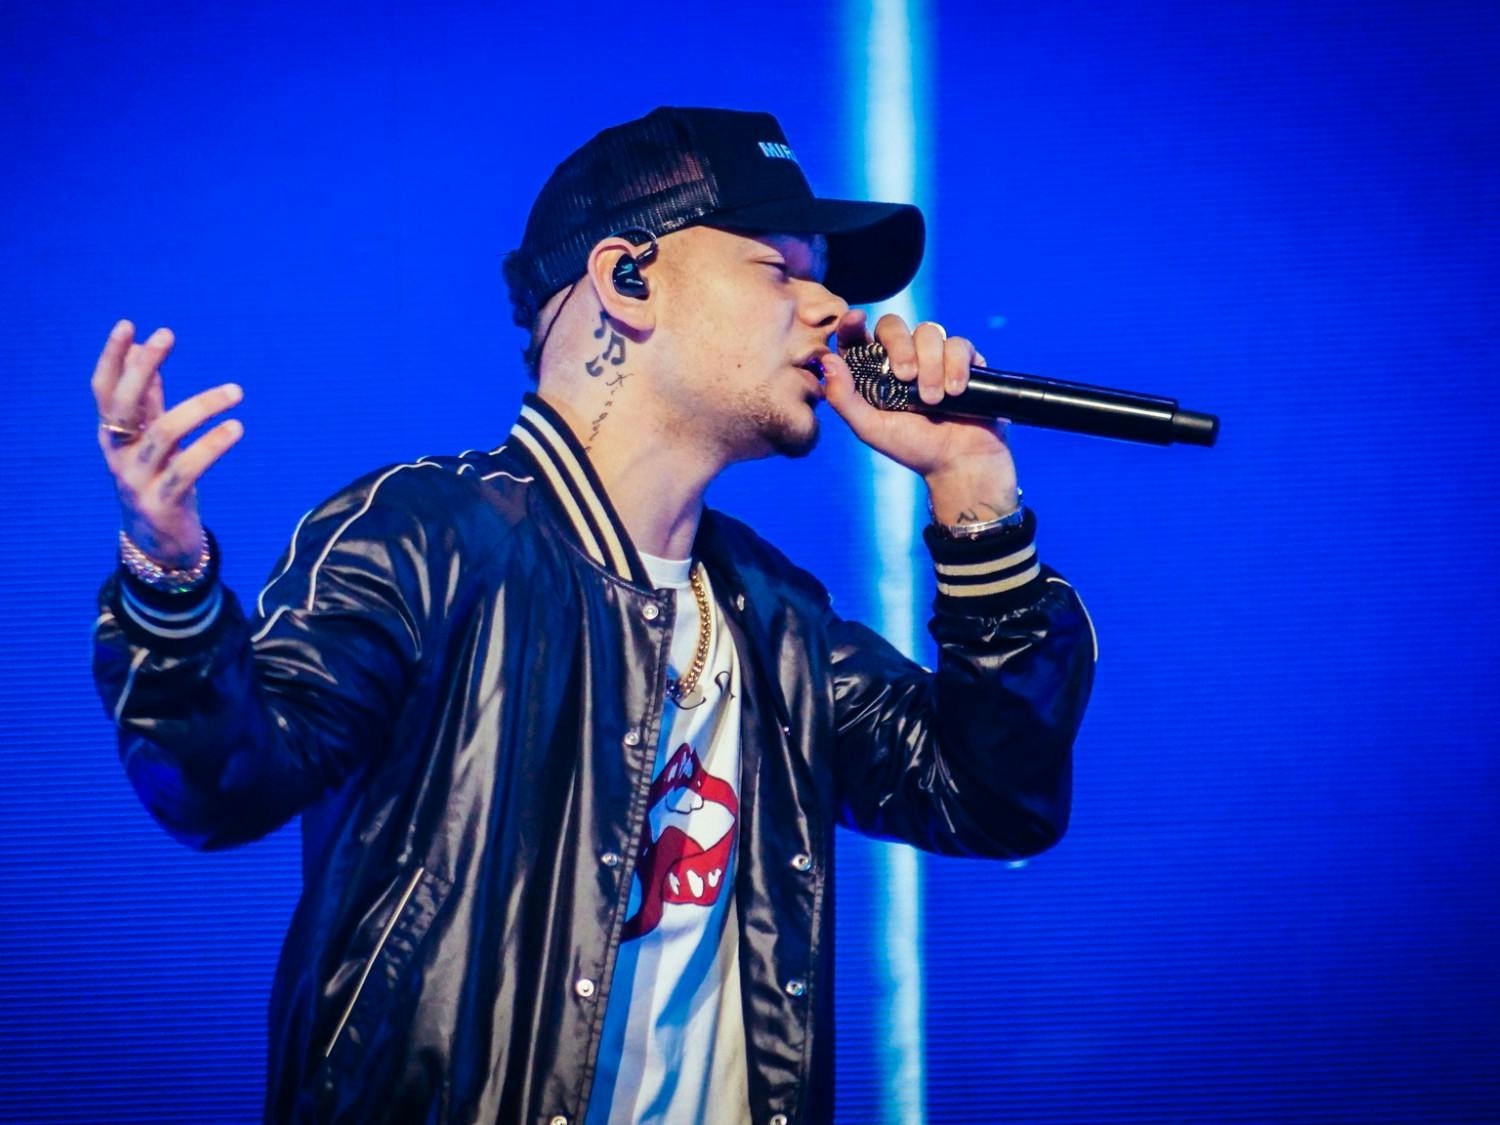 Kane Brown performing hits including Homesick, Heaven, and One Thing Right to a sold-out crowd at KeyBank Center.